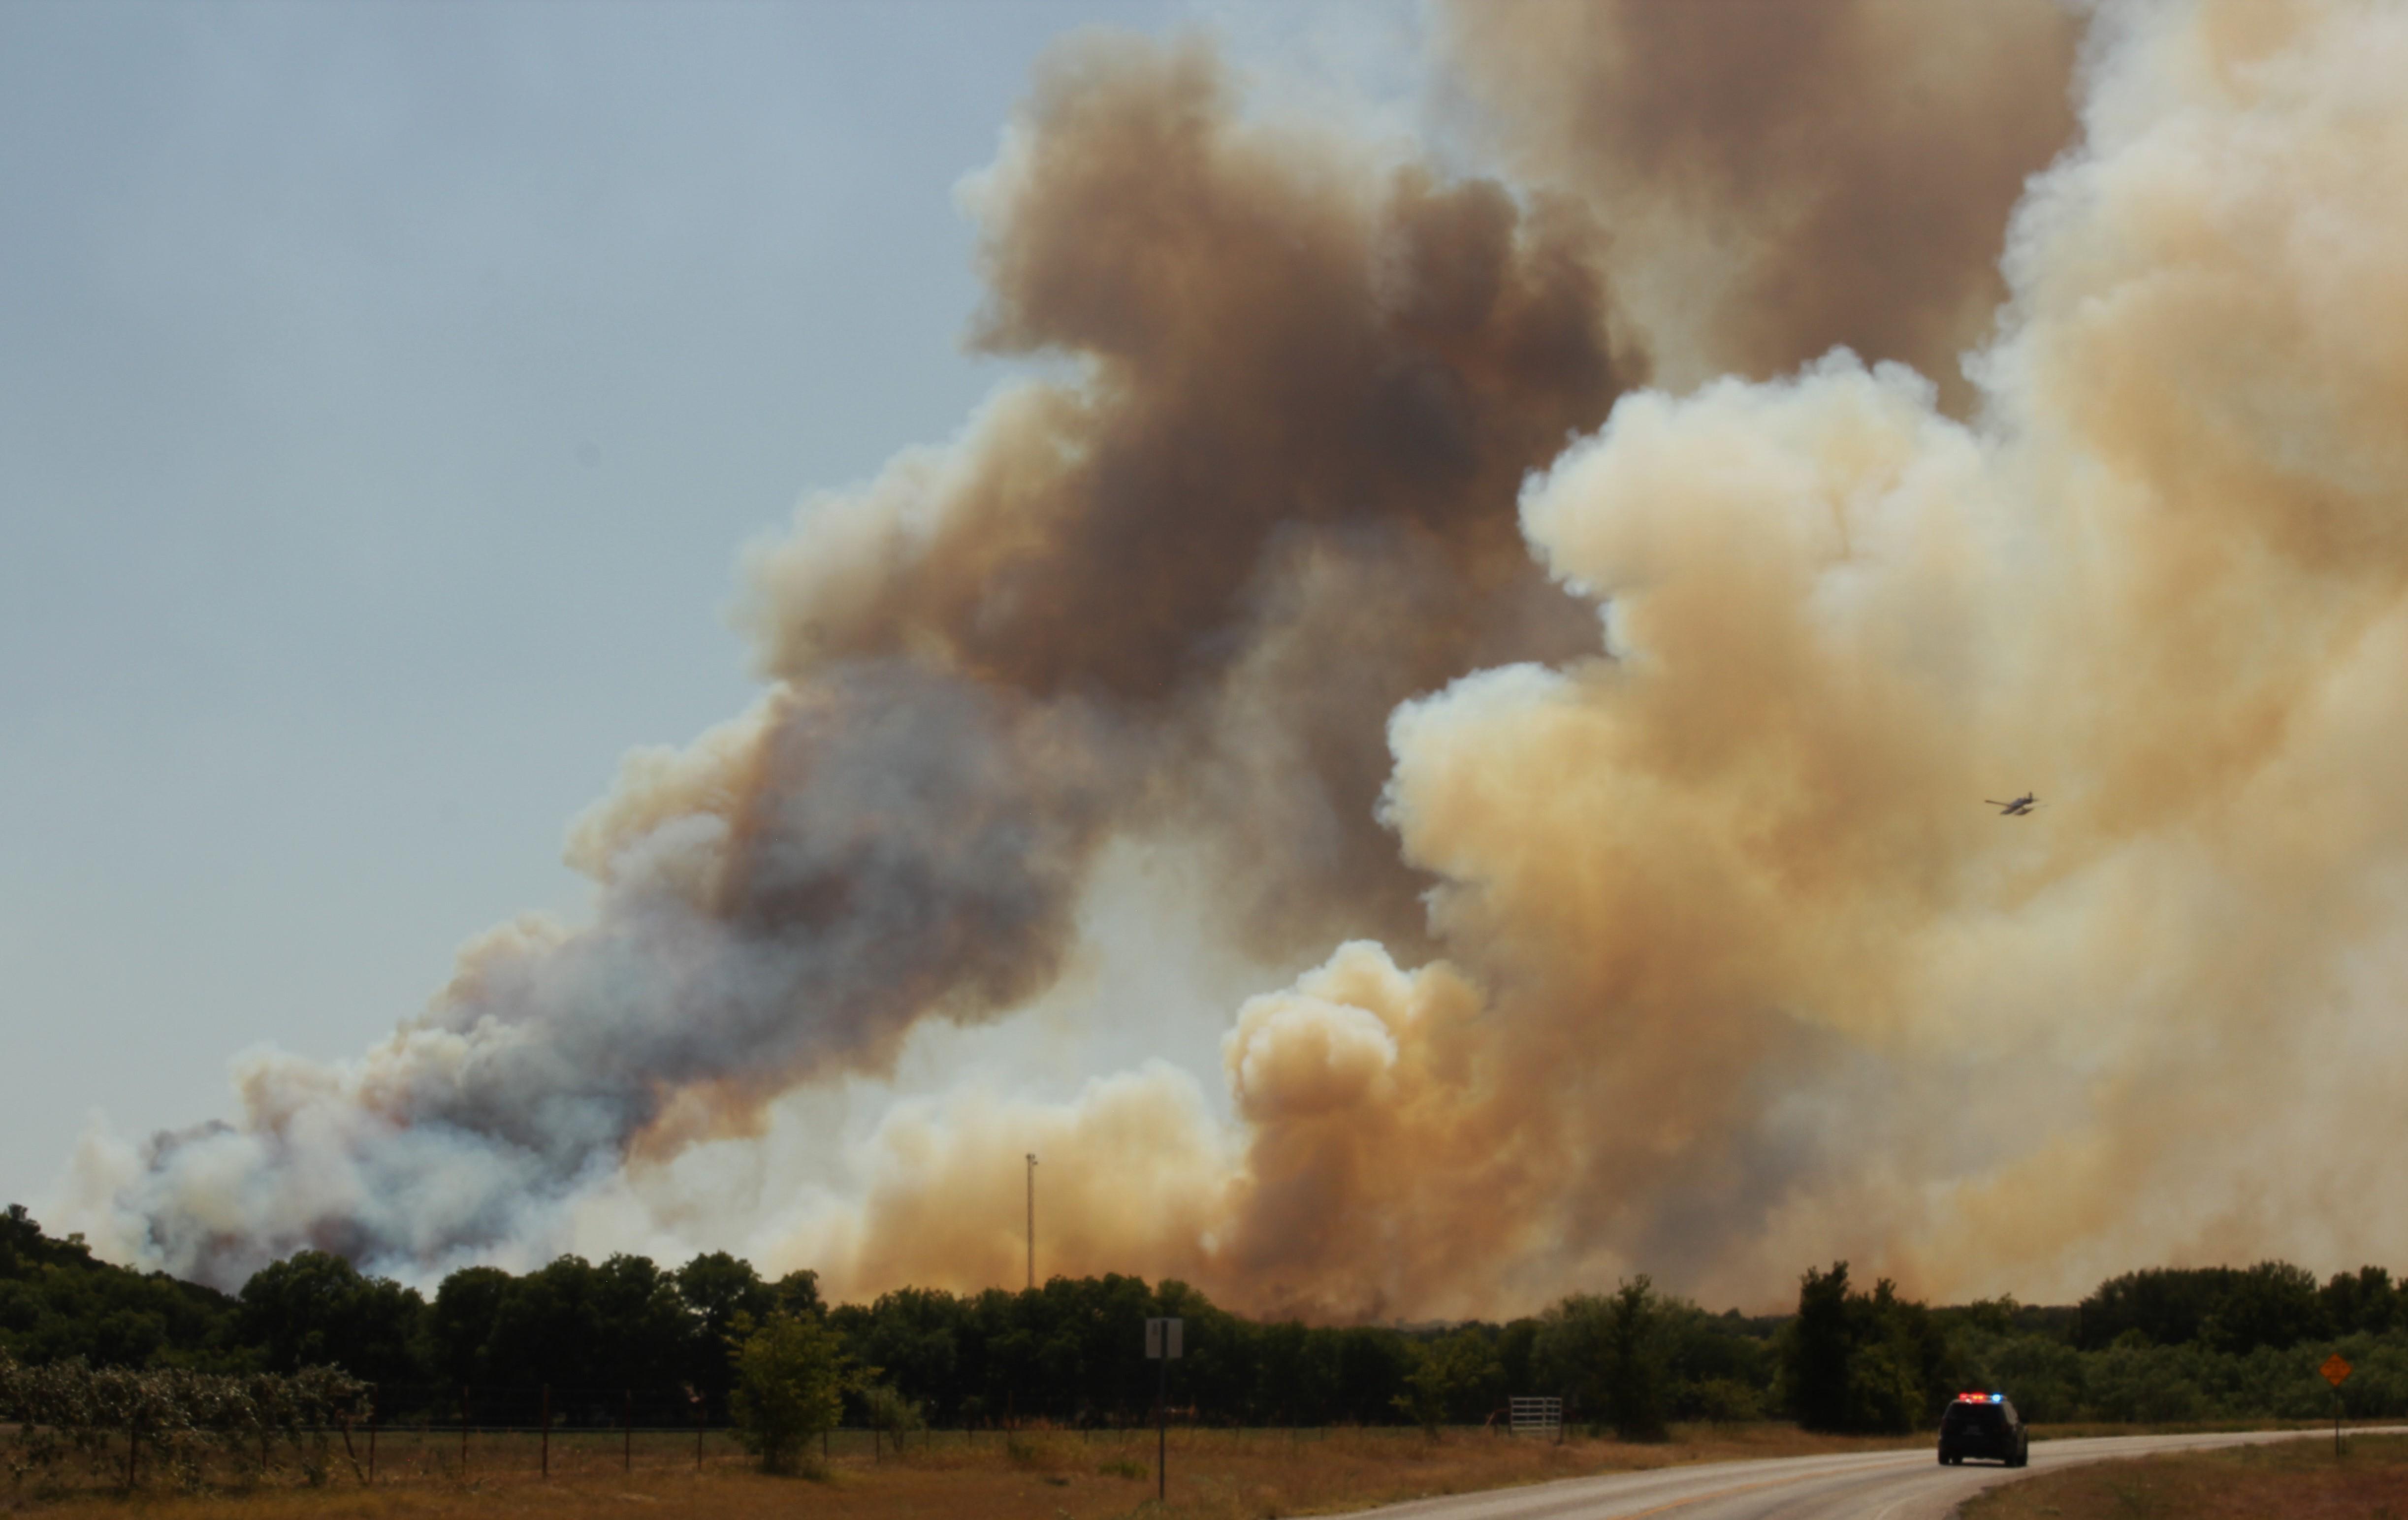 Smoke plume as seen on FM205 at approx 4pm on July 19